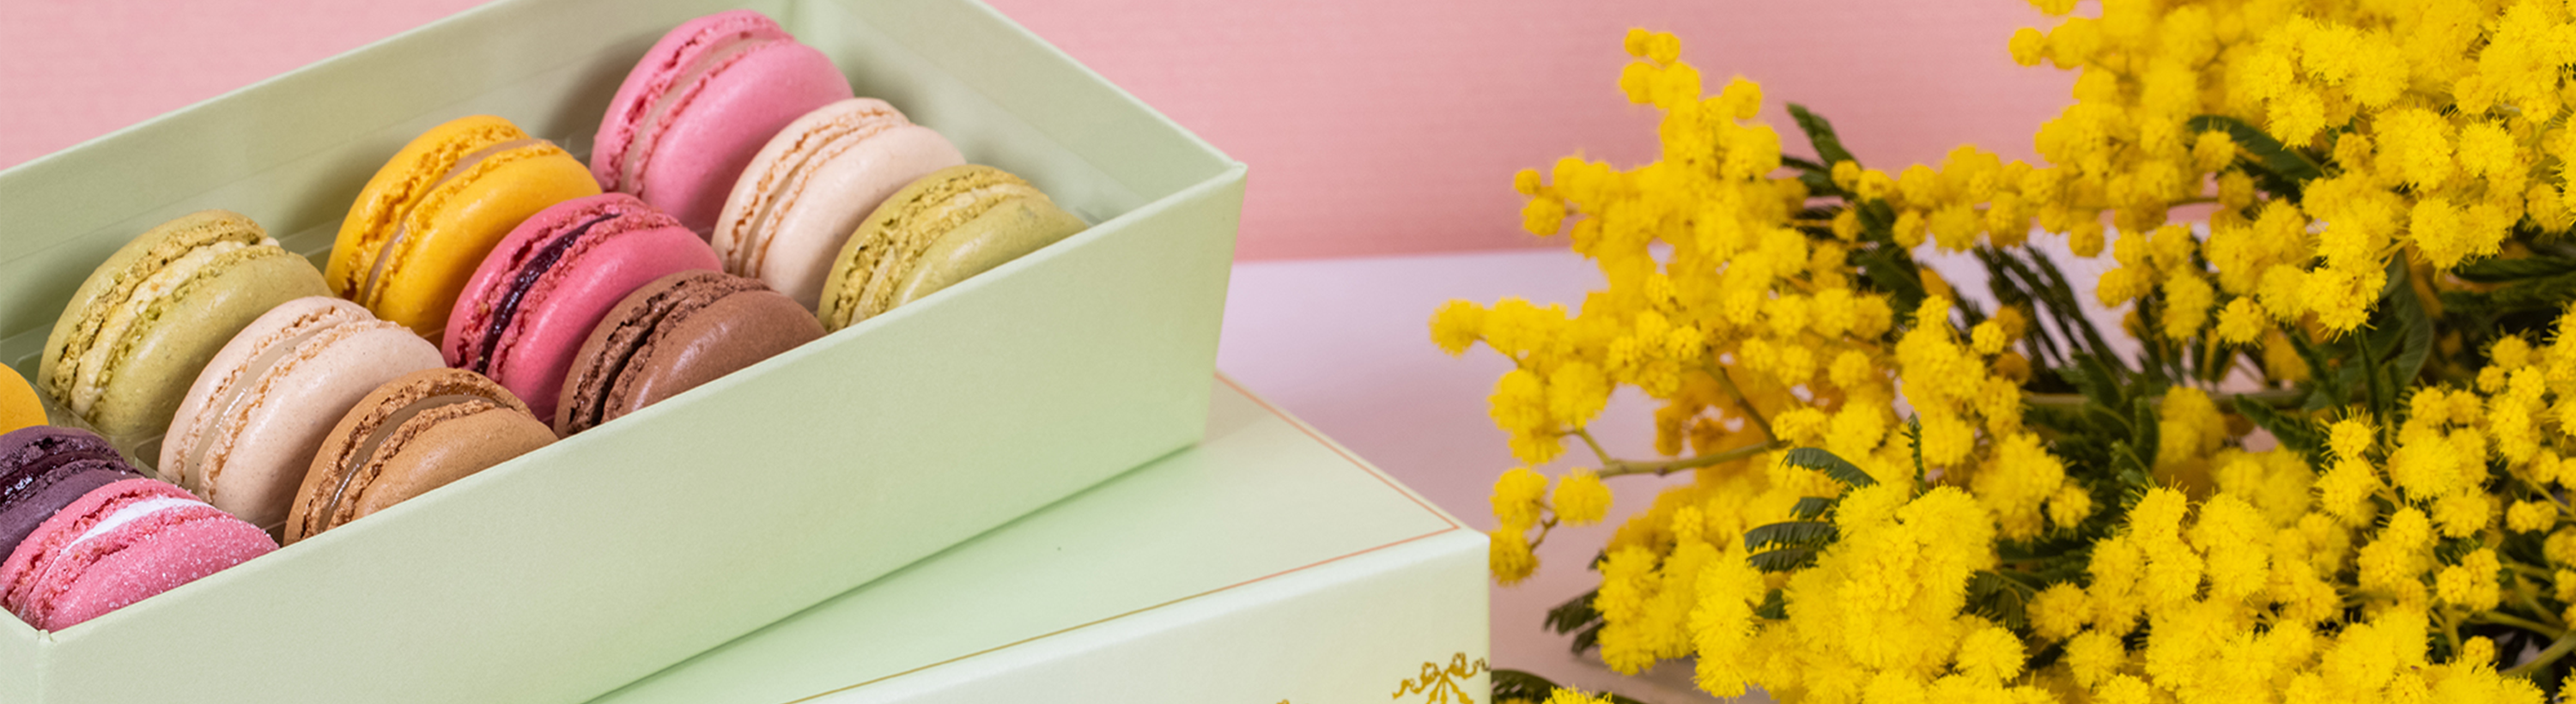 Say "Thank You!" with Ladurée